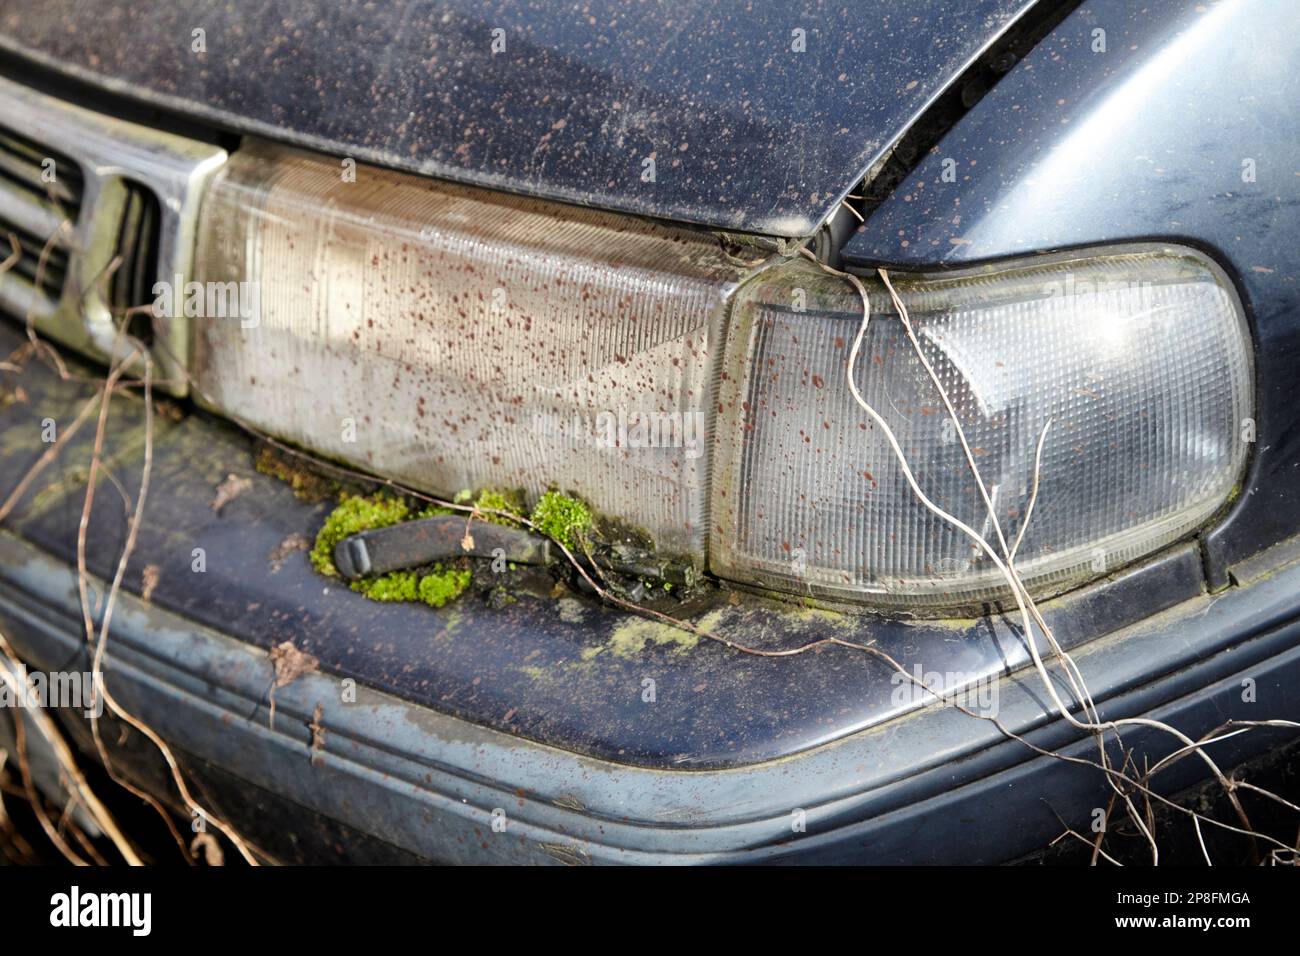 moss and weed vegetation growth on headlight of old abandoned barn find car Belfast Northern Ireland UK Stock Photo